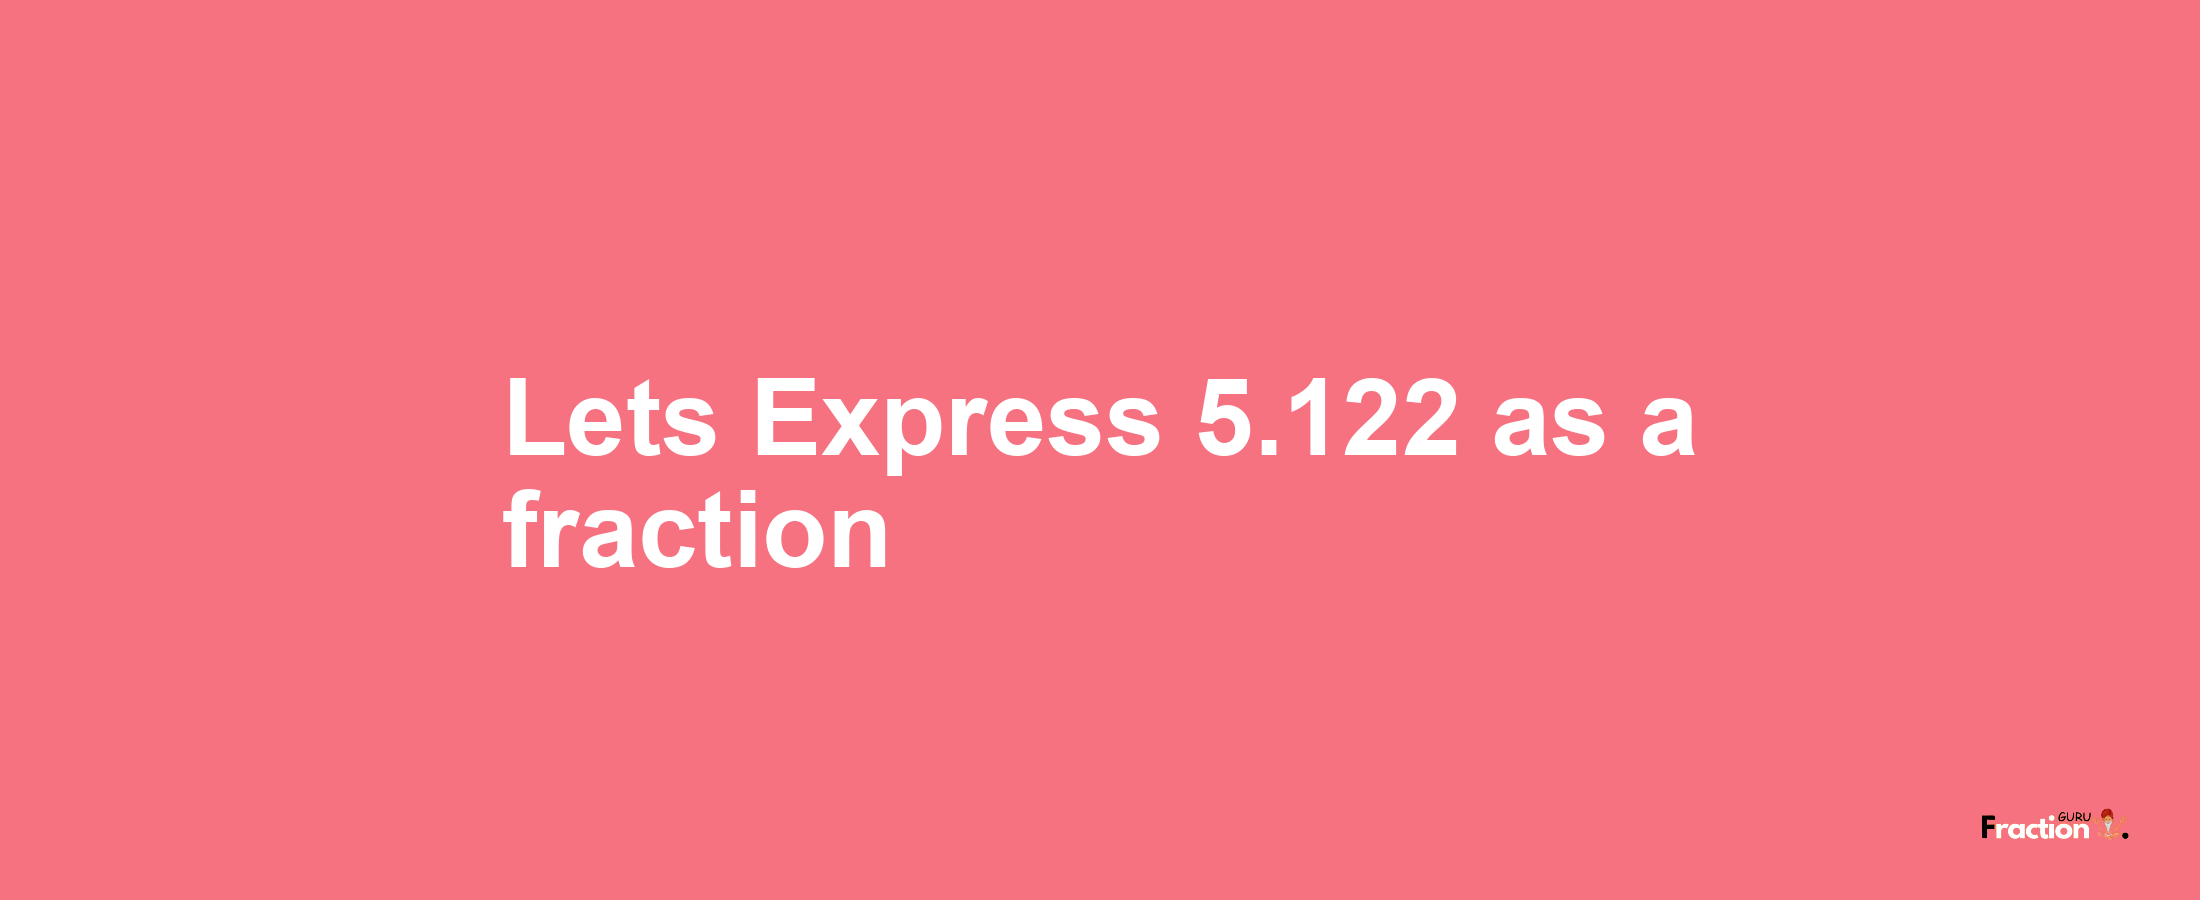 Lets Express 5.122 as afraction